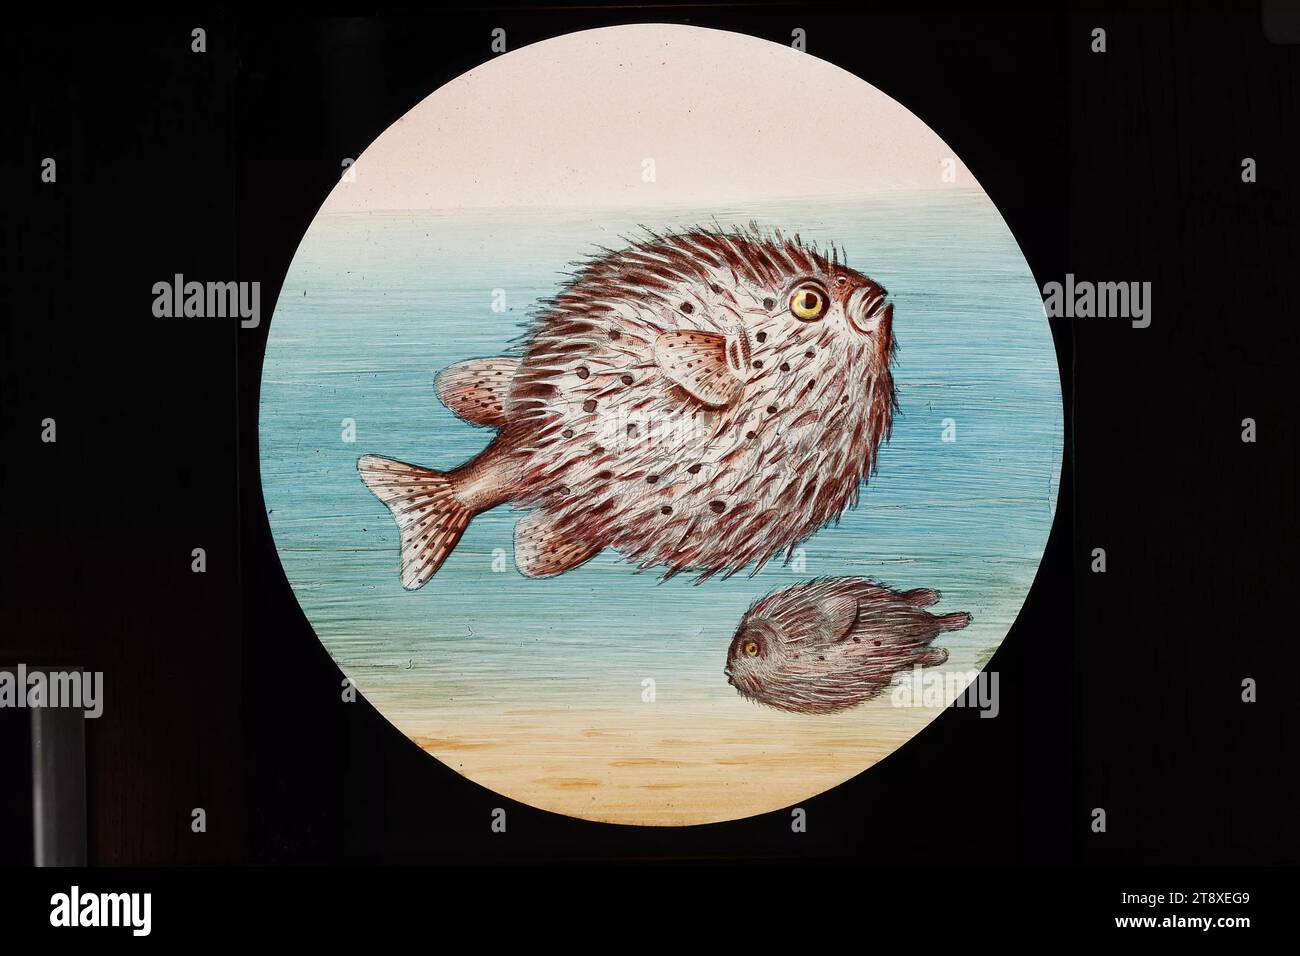 Laterna Magica picture: Puffer fishes, W. E. F. Newton, realization, Date around 1885, water color, glass, wood, pinned, diameter 7, 6 cm, Fine Arts, Animals, Exoticism, fishes, The Vienna Collection Stock Photo